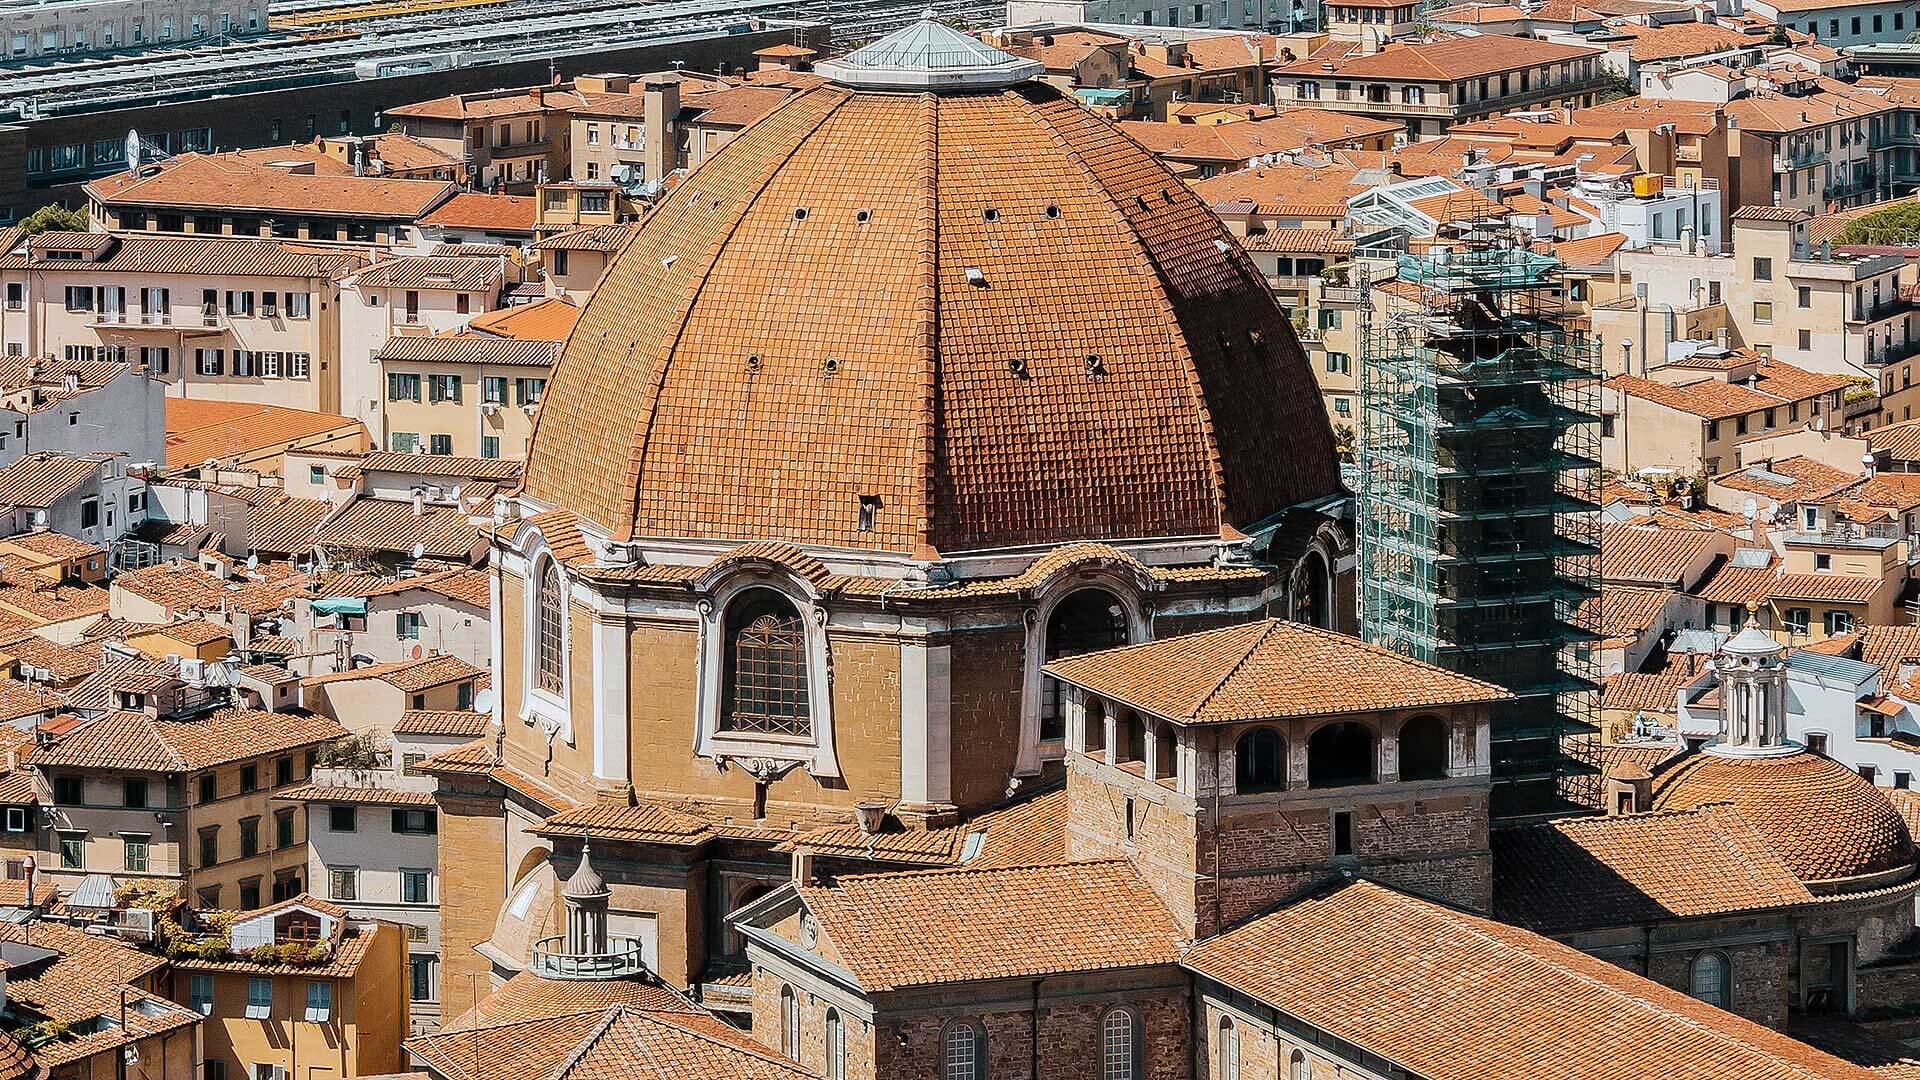 The Early Italian Renaissance - Just Italy Travel Guide